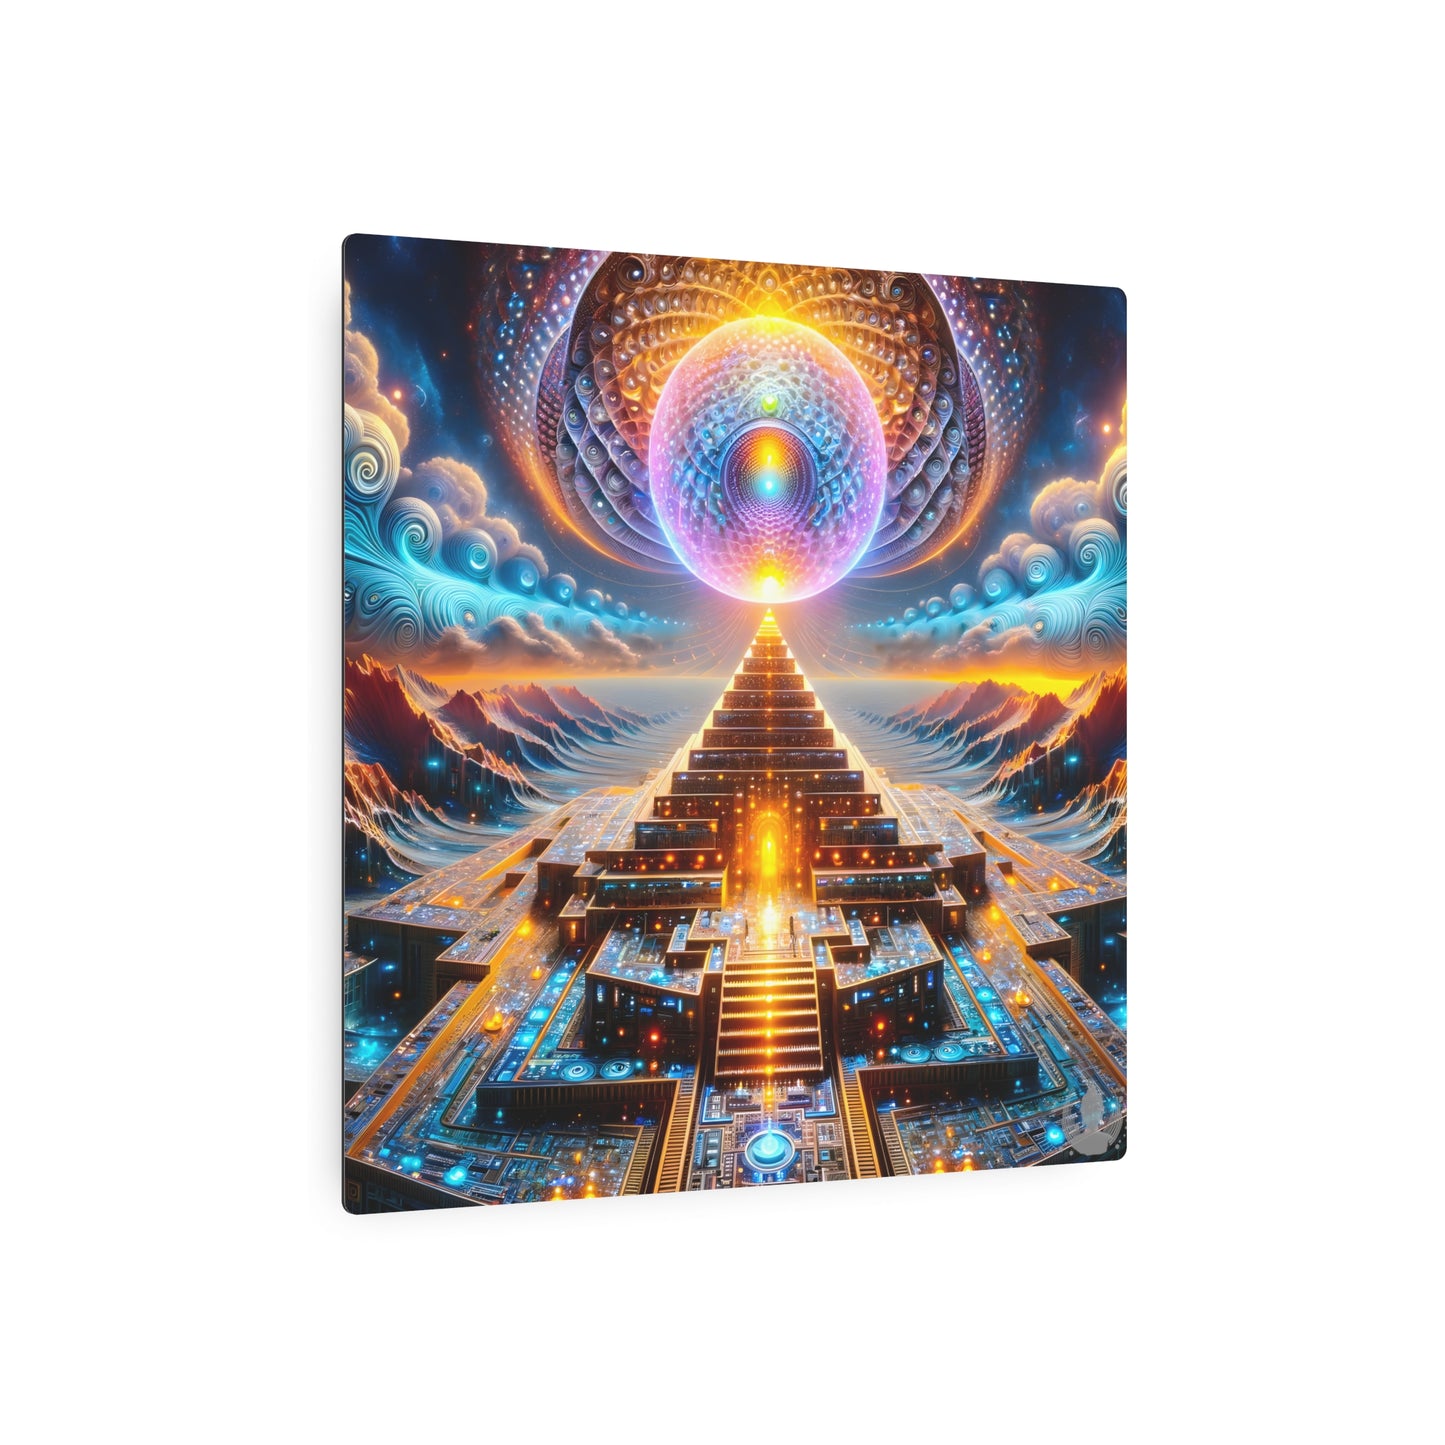 Recursive Technology Metal Print by Meta Zen - Psychedelic Visionary Trippy Art Friend Lover Boyfriend Girlfriend Mother Father Sister Brother Gift